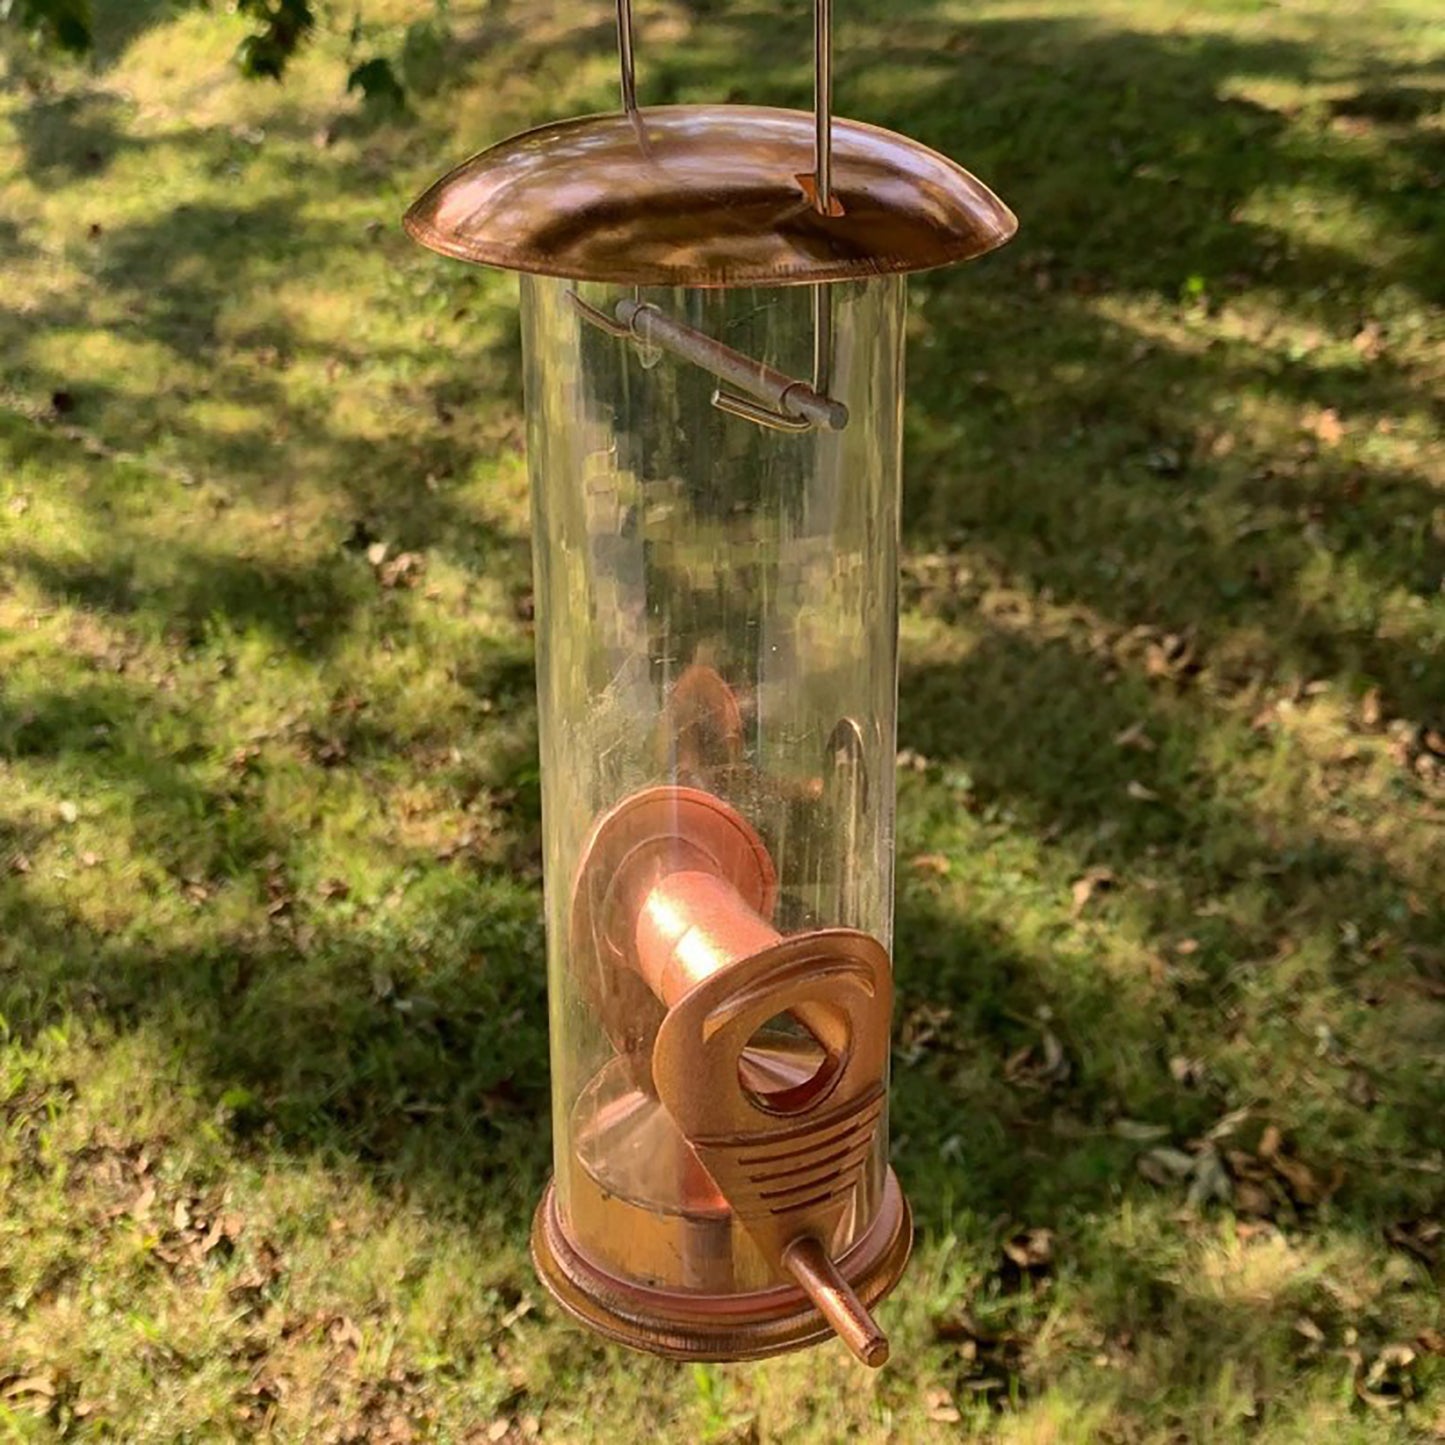 Metal Bird Feeding Station with Copper Style Feeders, Mealworm Tray and Water Dish